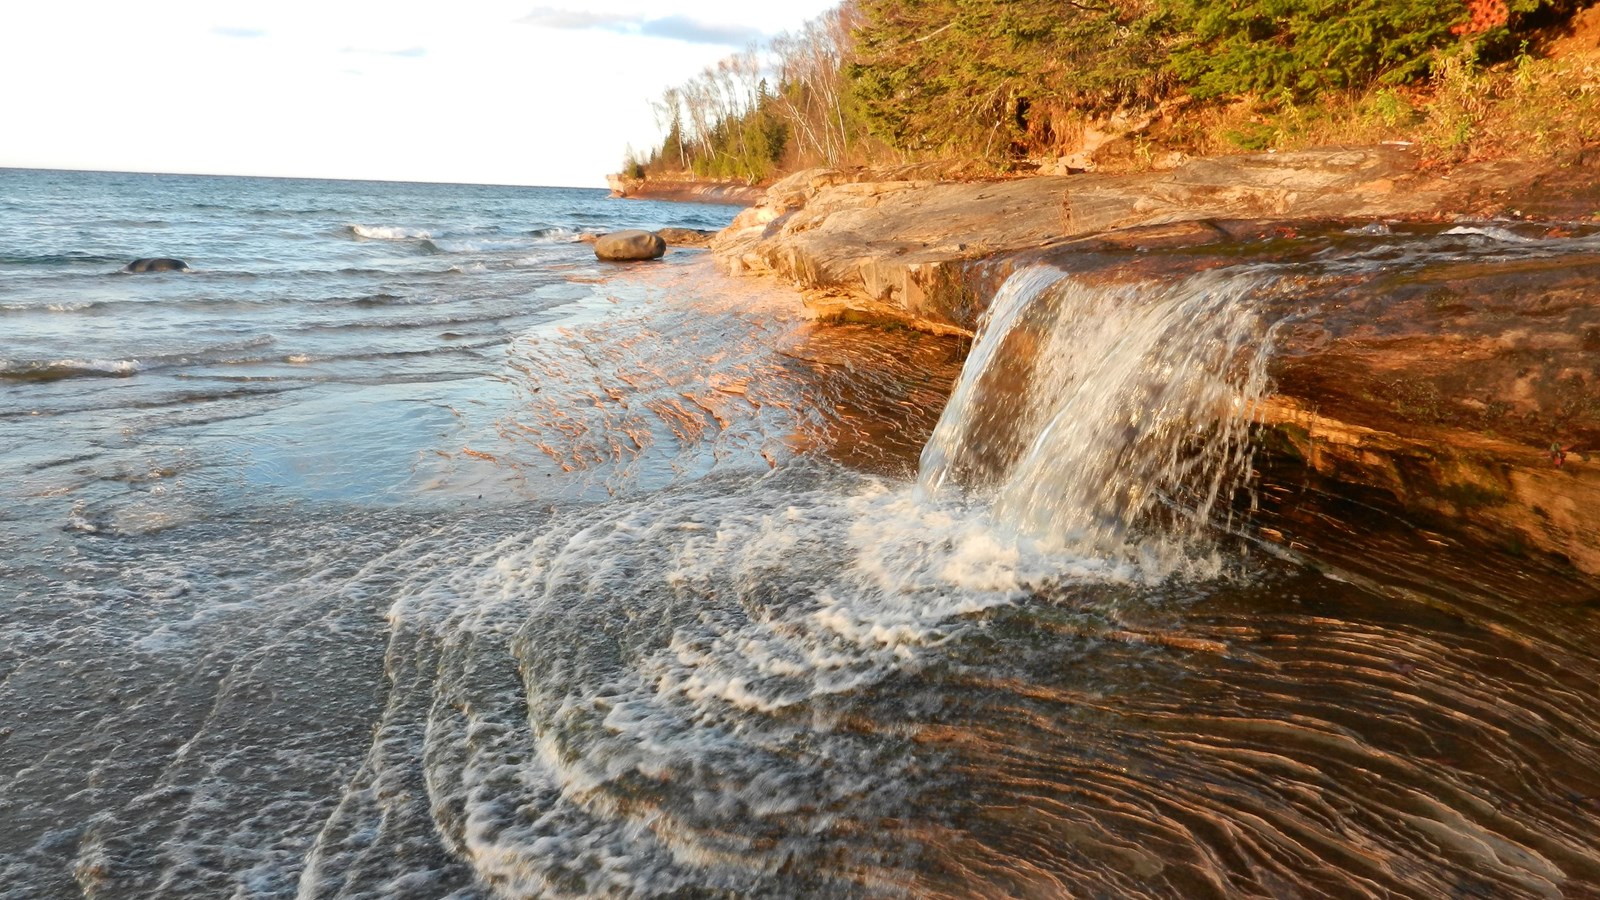 Two foot tall waterfall flows over a rocky ledge and slope of smooth rock into Lake Superior.